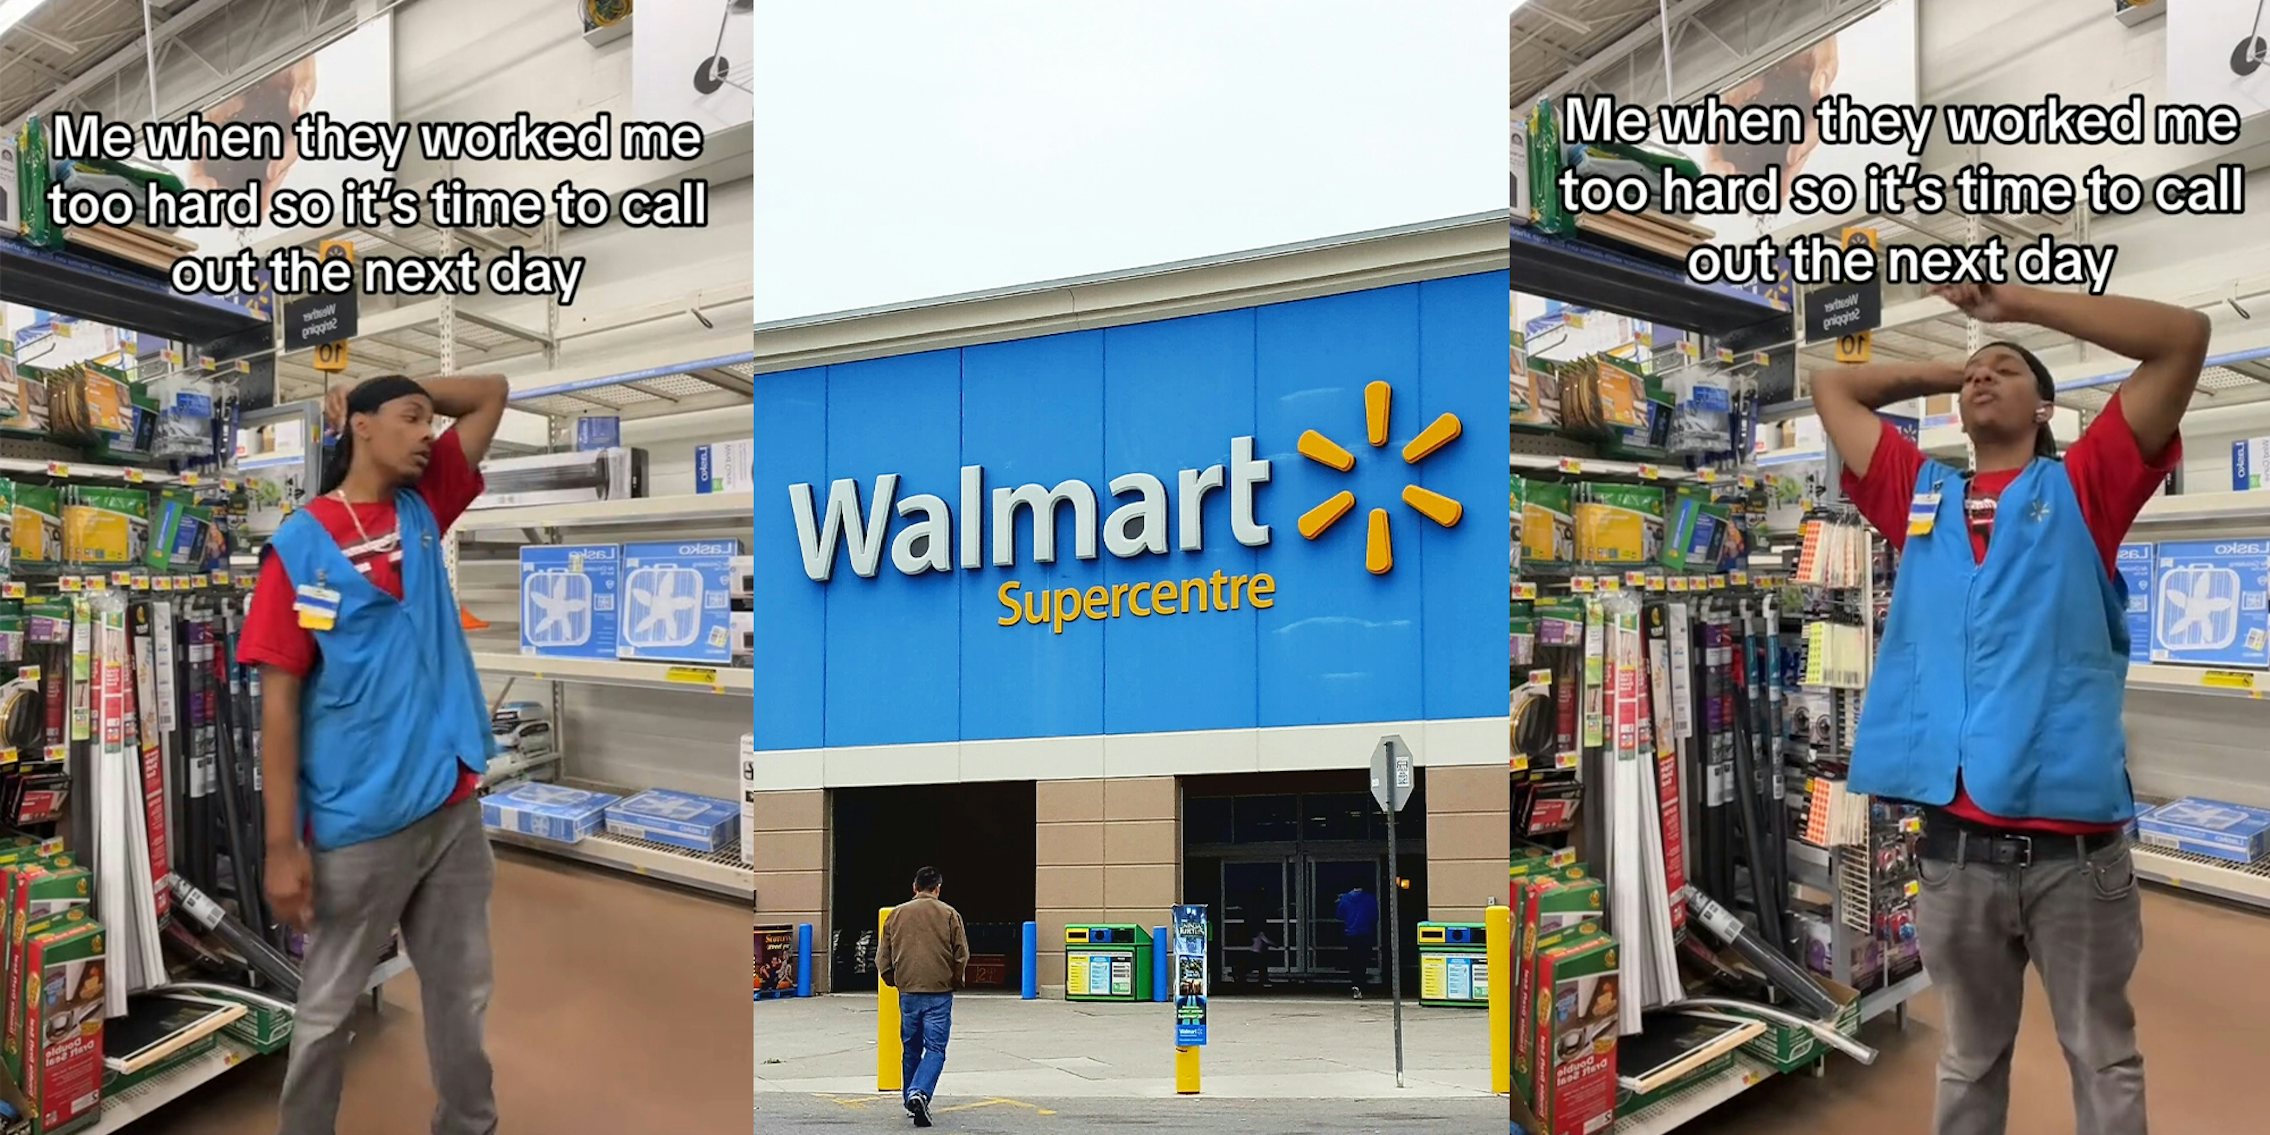 Walmart worker who calls out after store ‘works him too hard’ during a shift